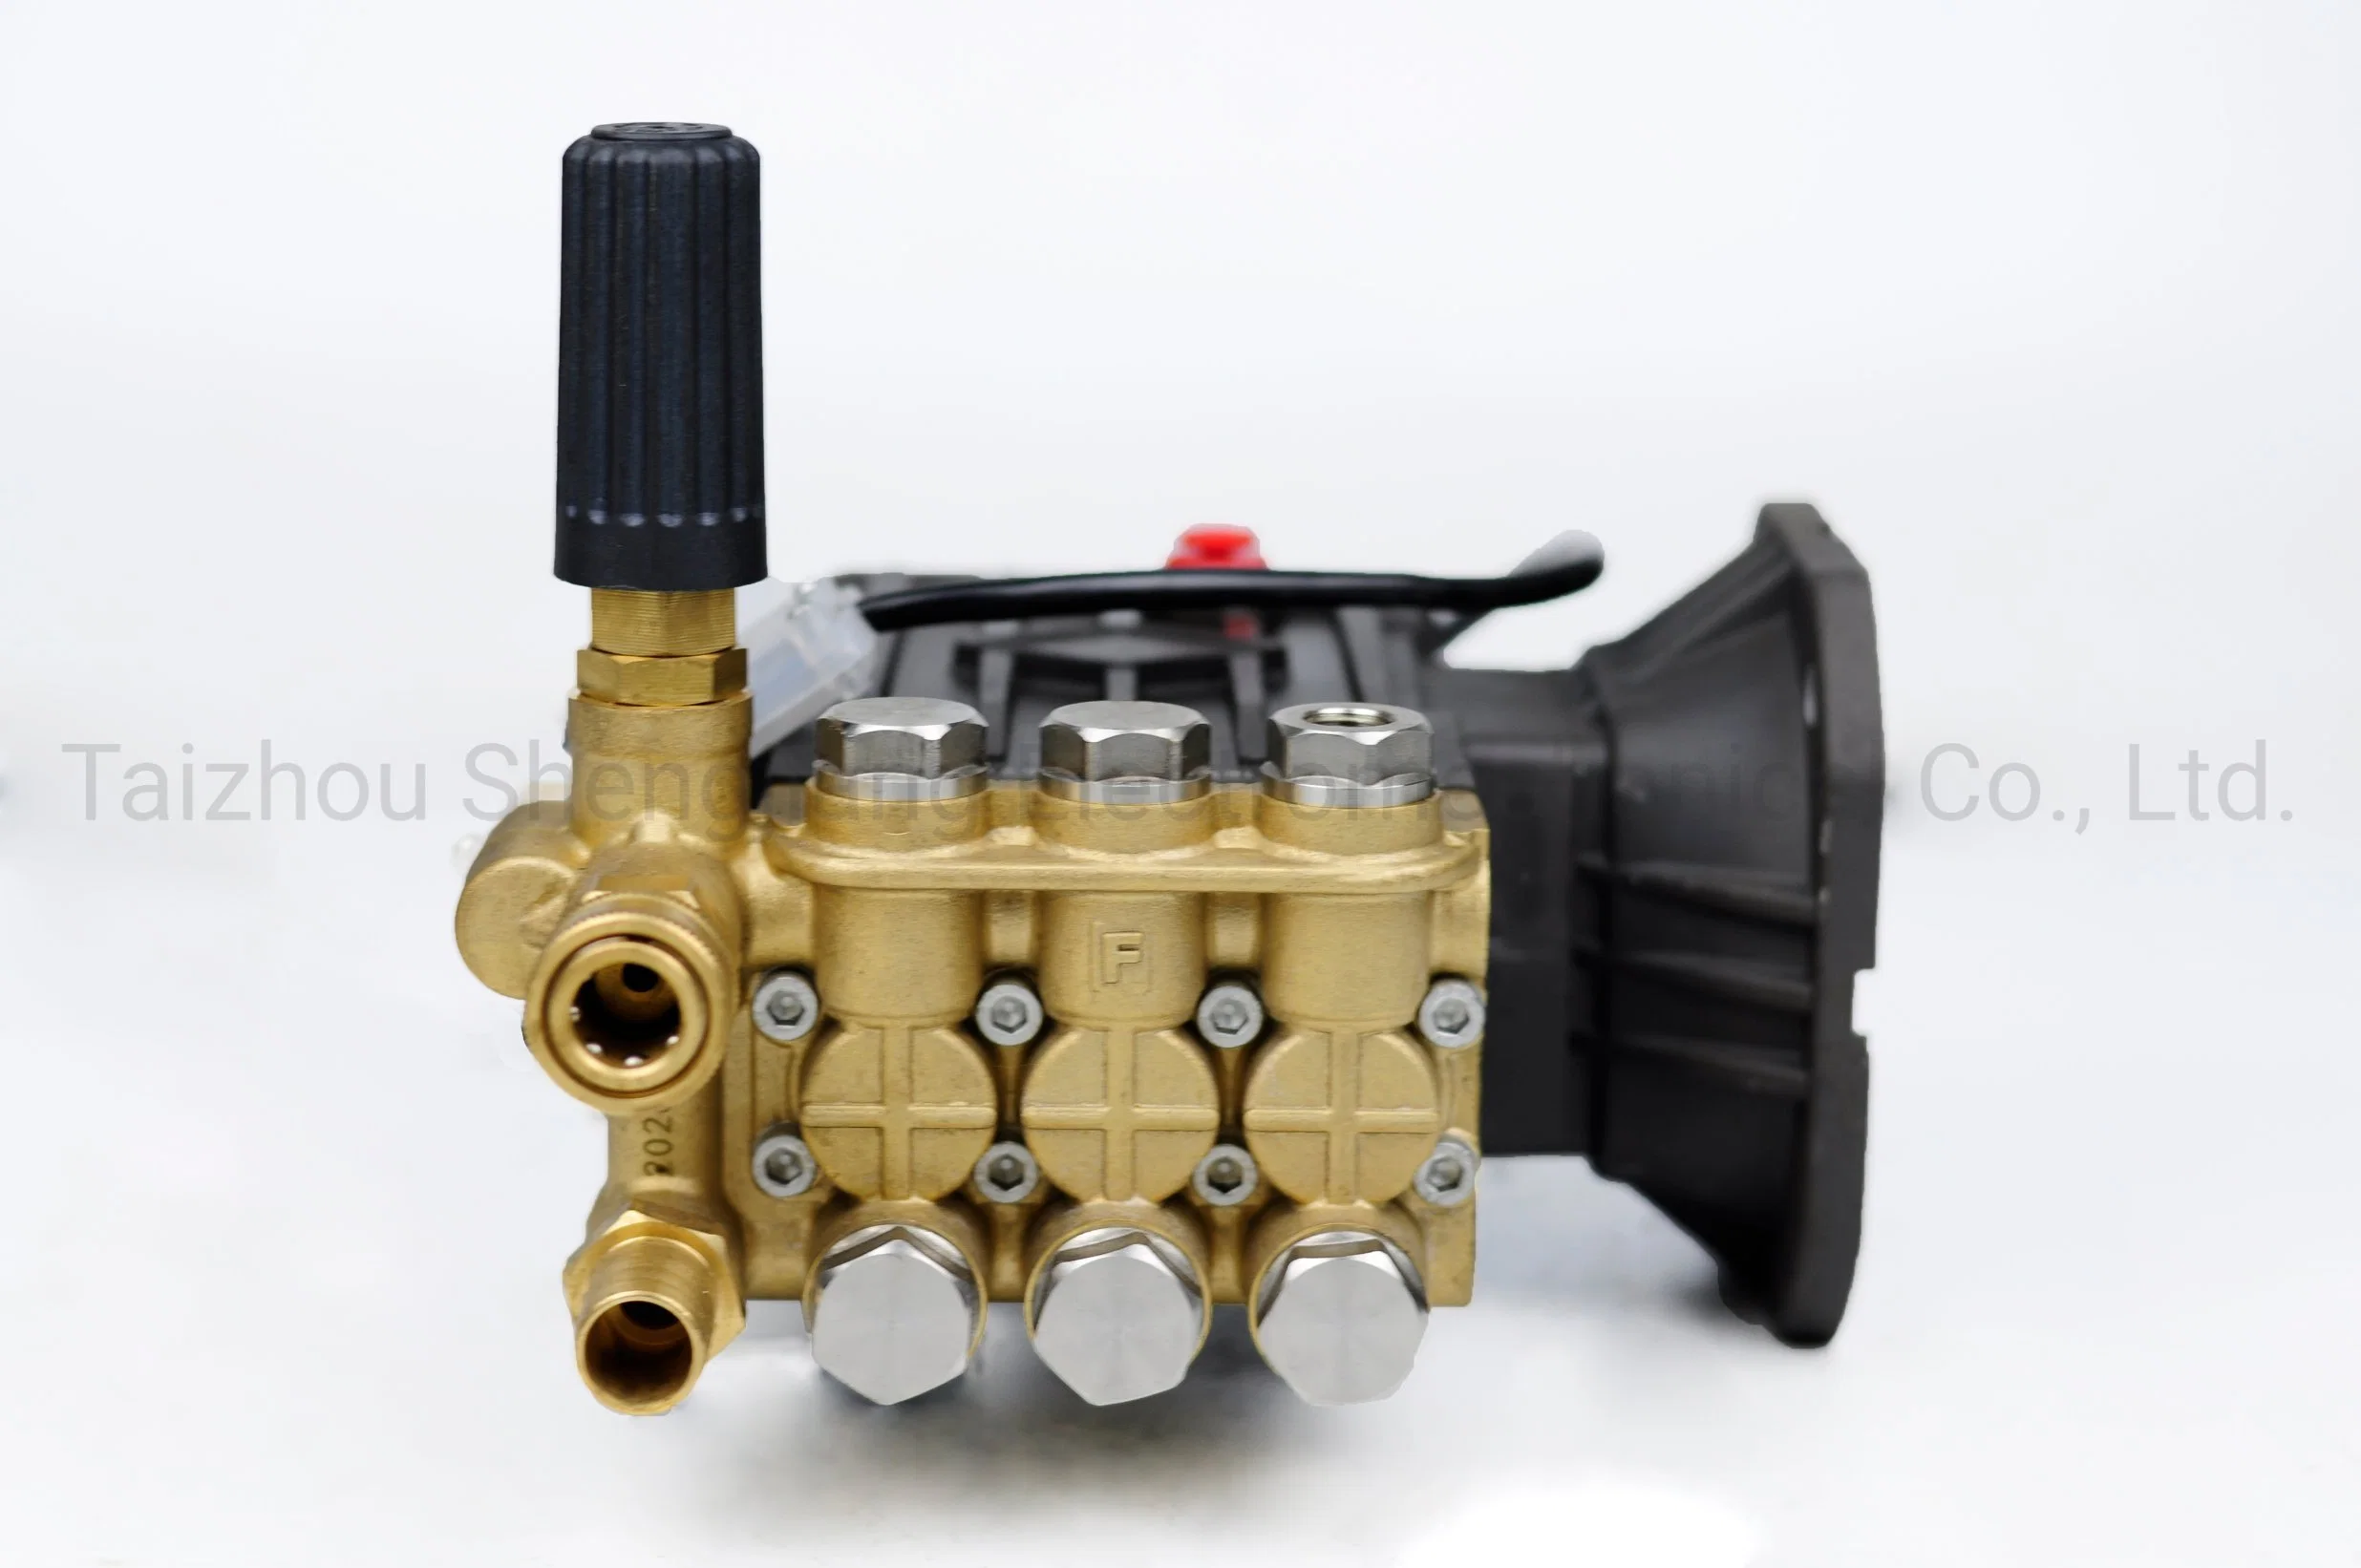 Auto Cut-off High Pressure Water Pump (Sjzg-1814) for Cleaning Washer